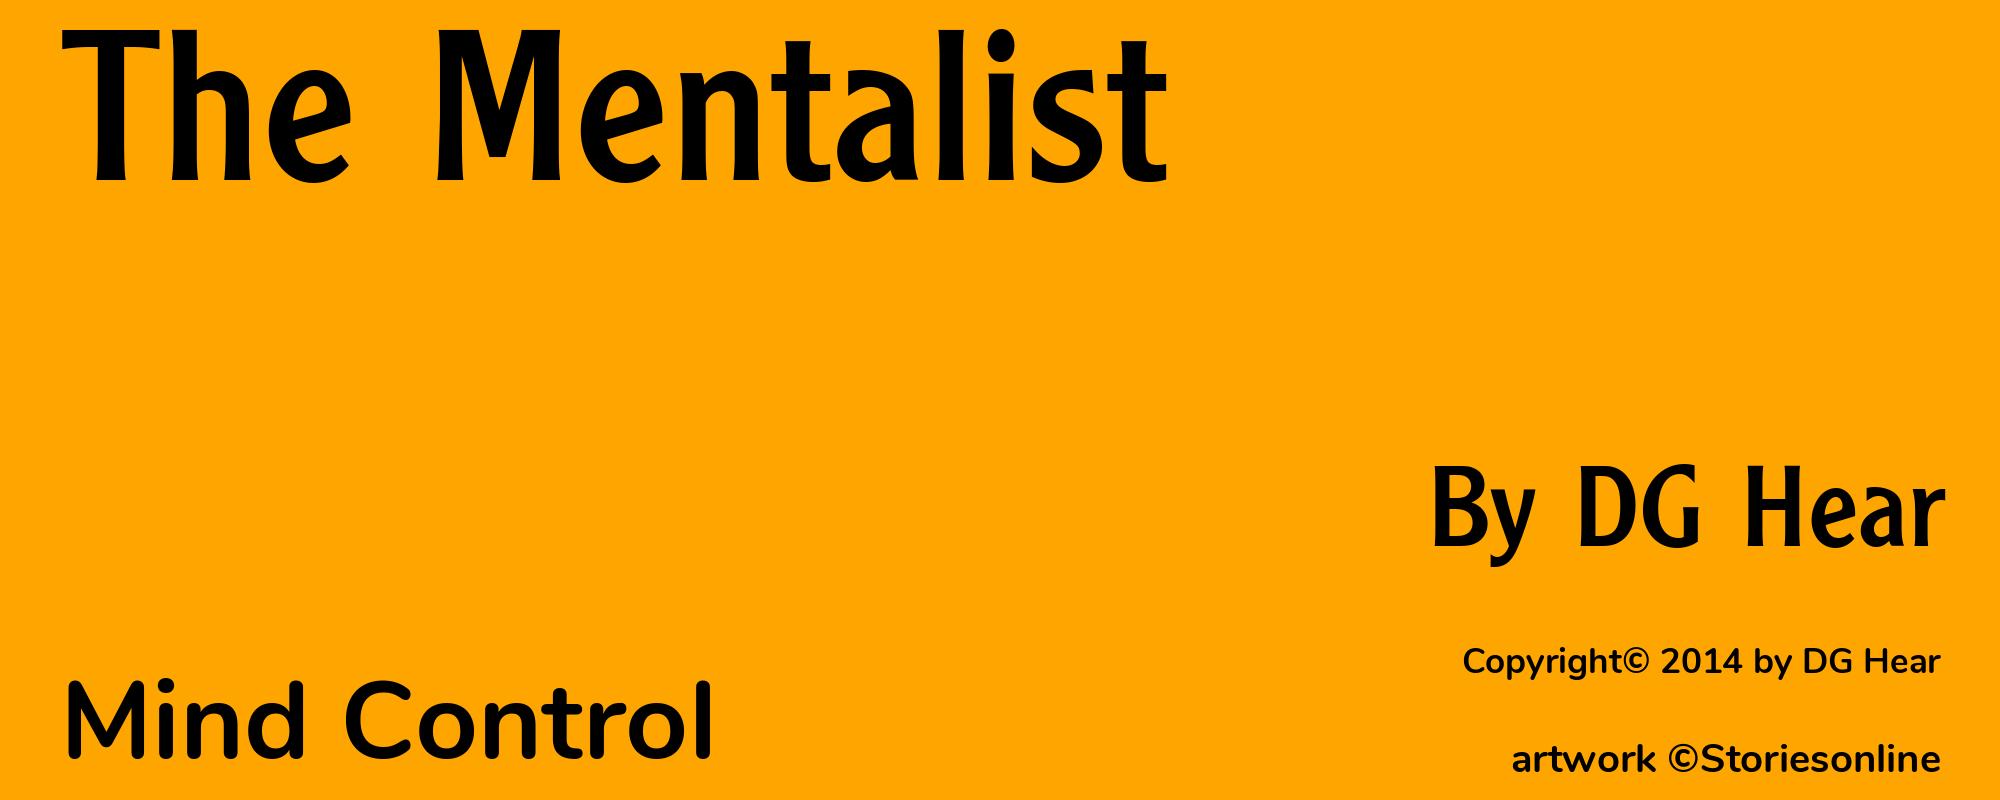 The Mentalist - Cover